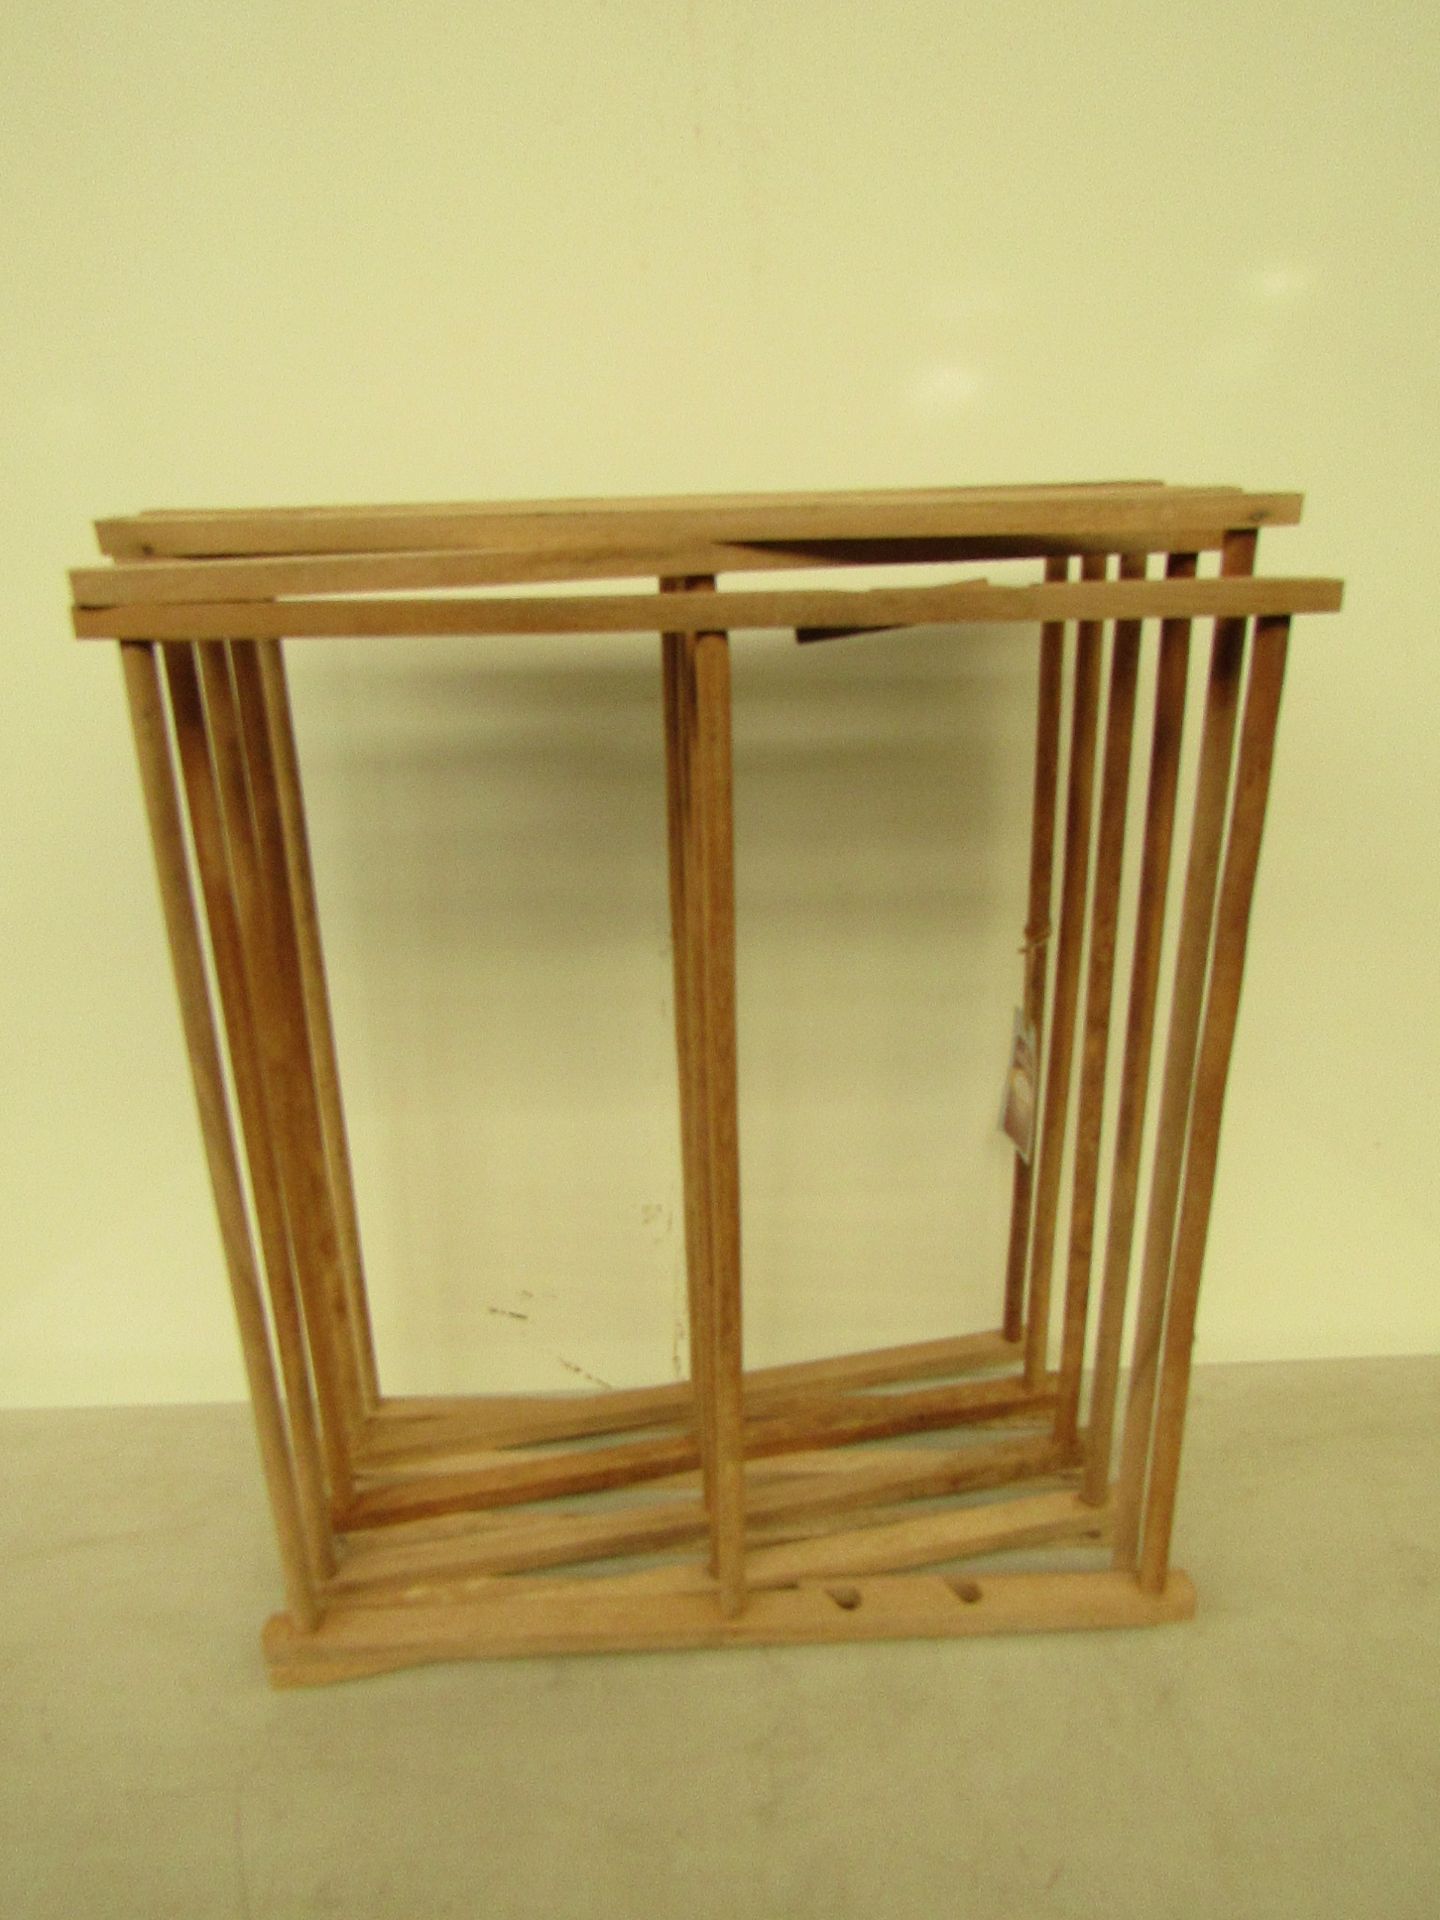 Traditional Wooden Clothes Airer. New with tag.